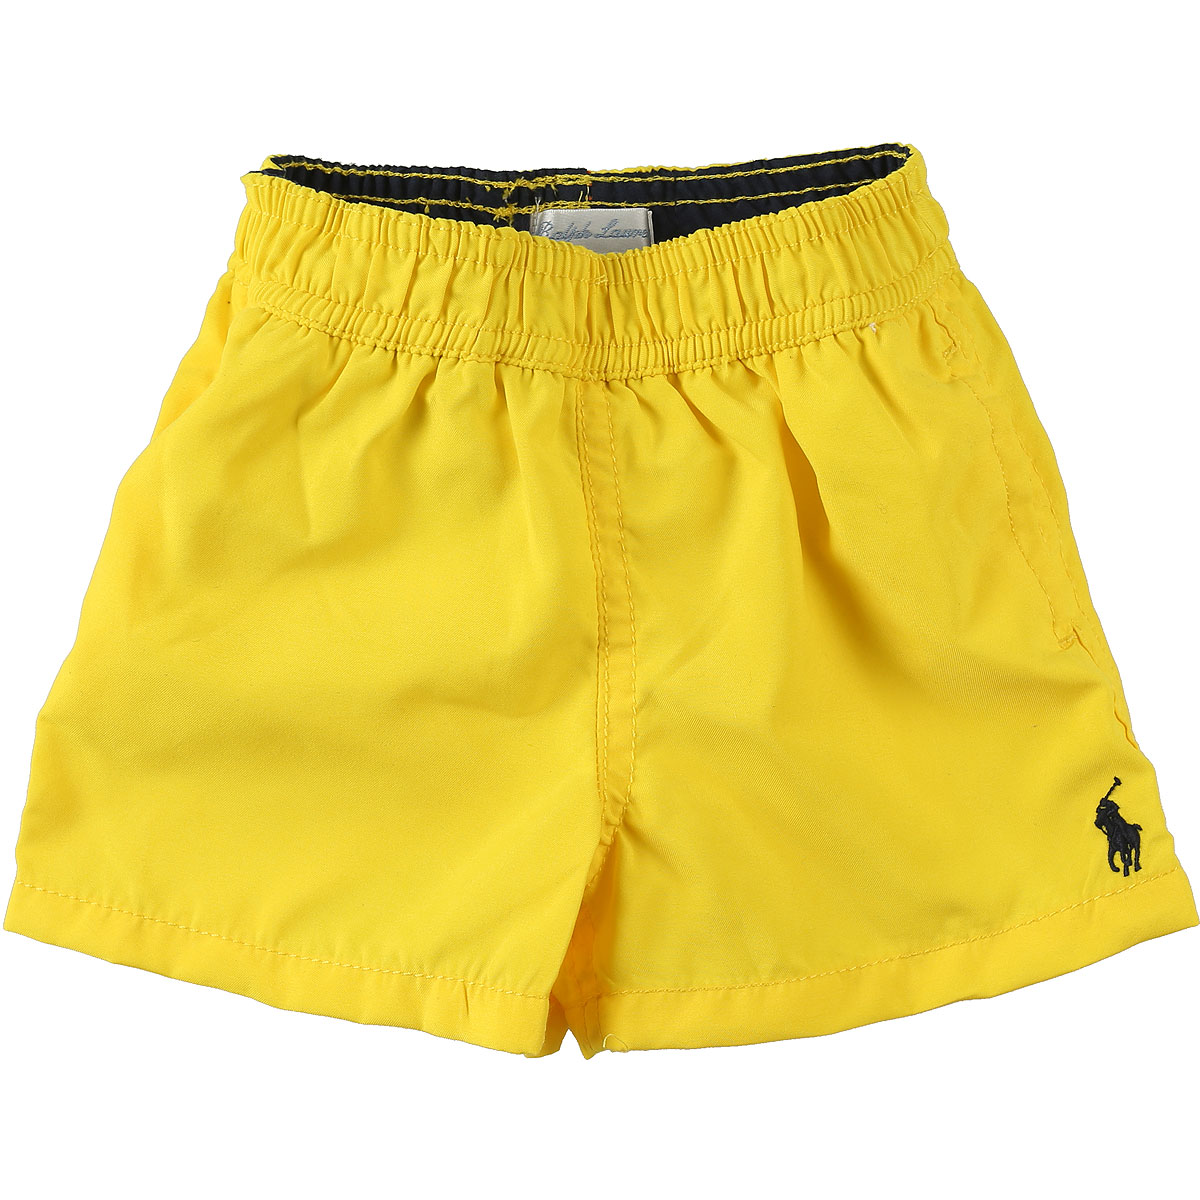 Ralph Lauren Maillots bain Outlet, Jaune, Polyester, 2017, 2Y 4Y 6Y M